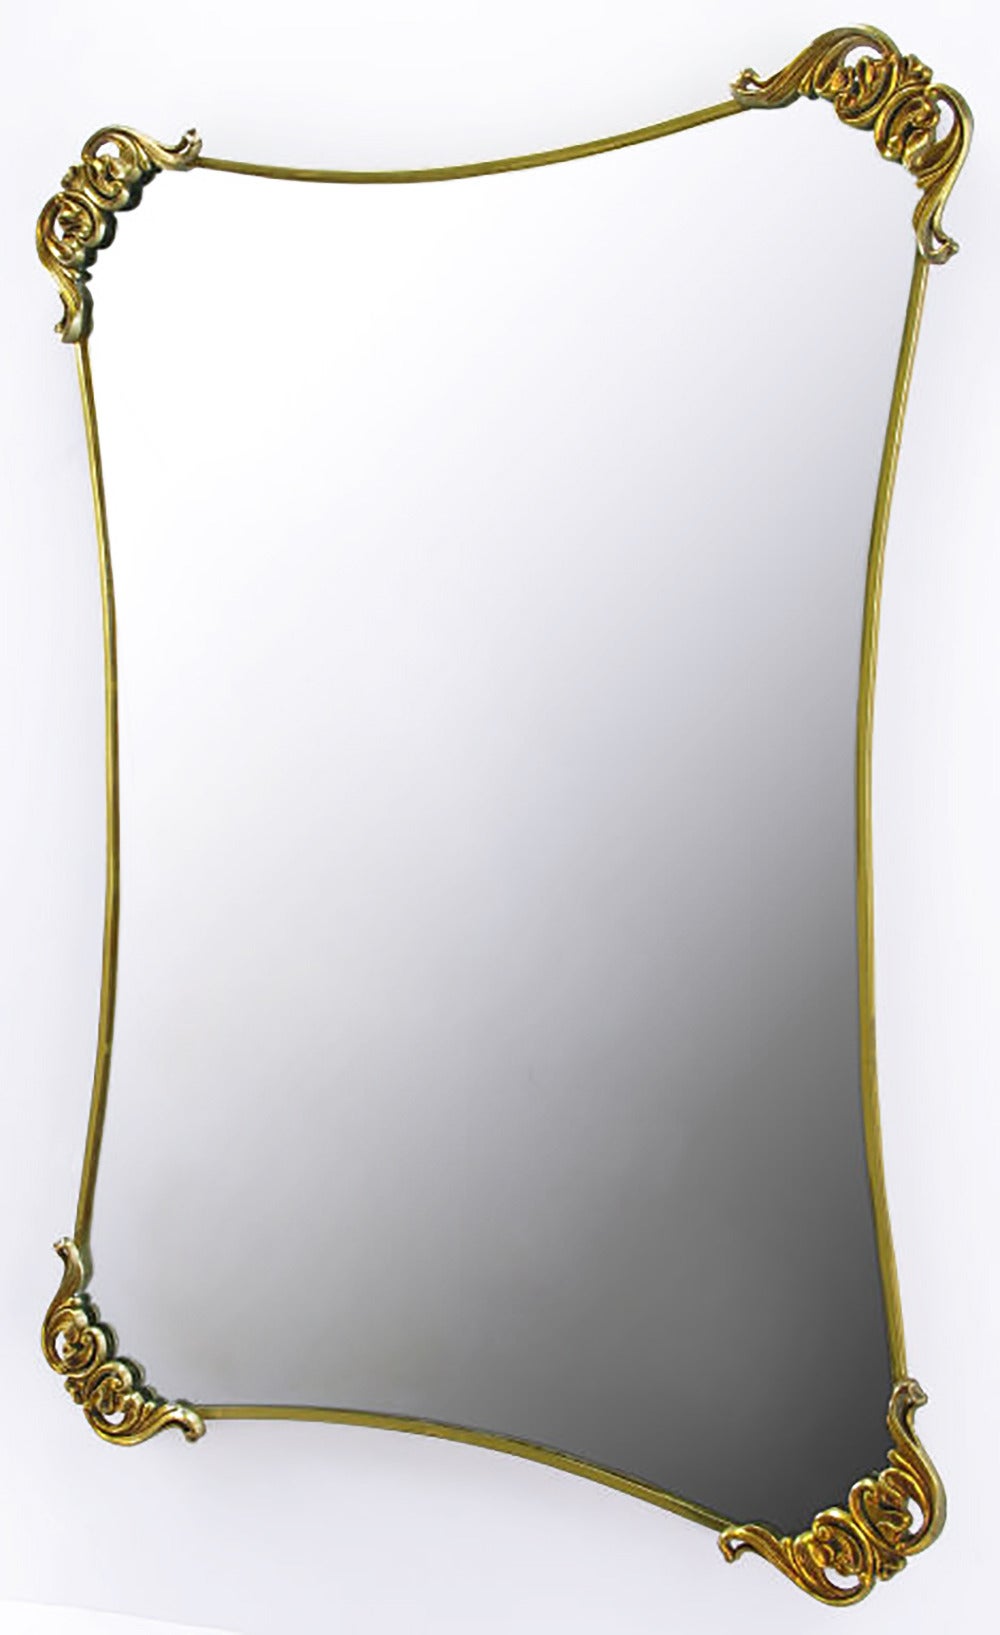 Elliptically indented Regency mirror, framed in brass-plated metal. Radiused corners are adorned with filigreed brass appointments. Can be hung horizontally or vertically.